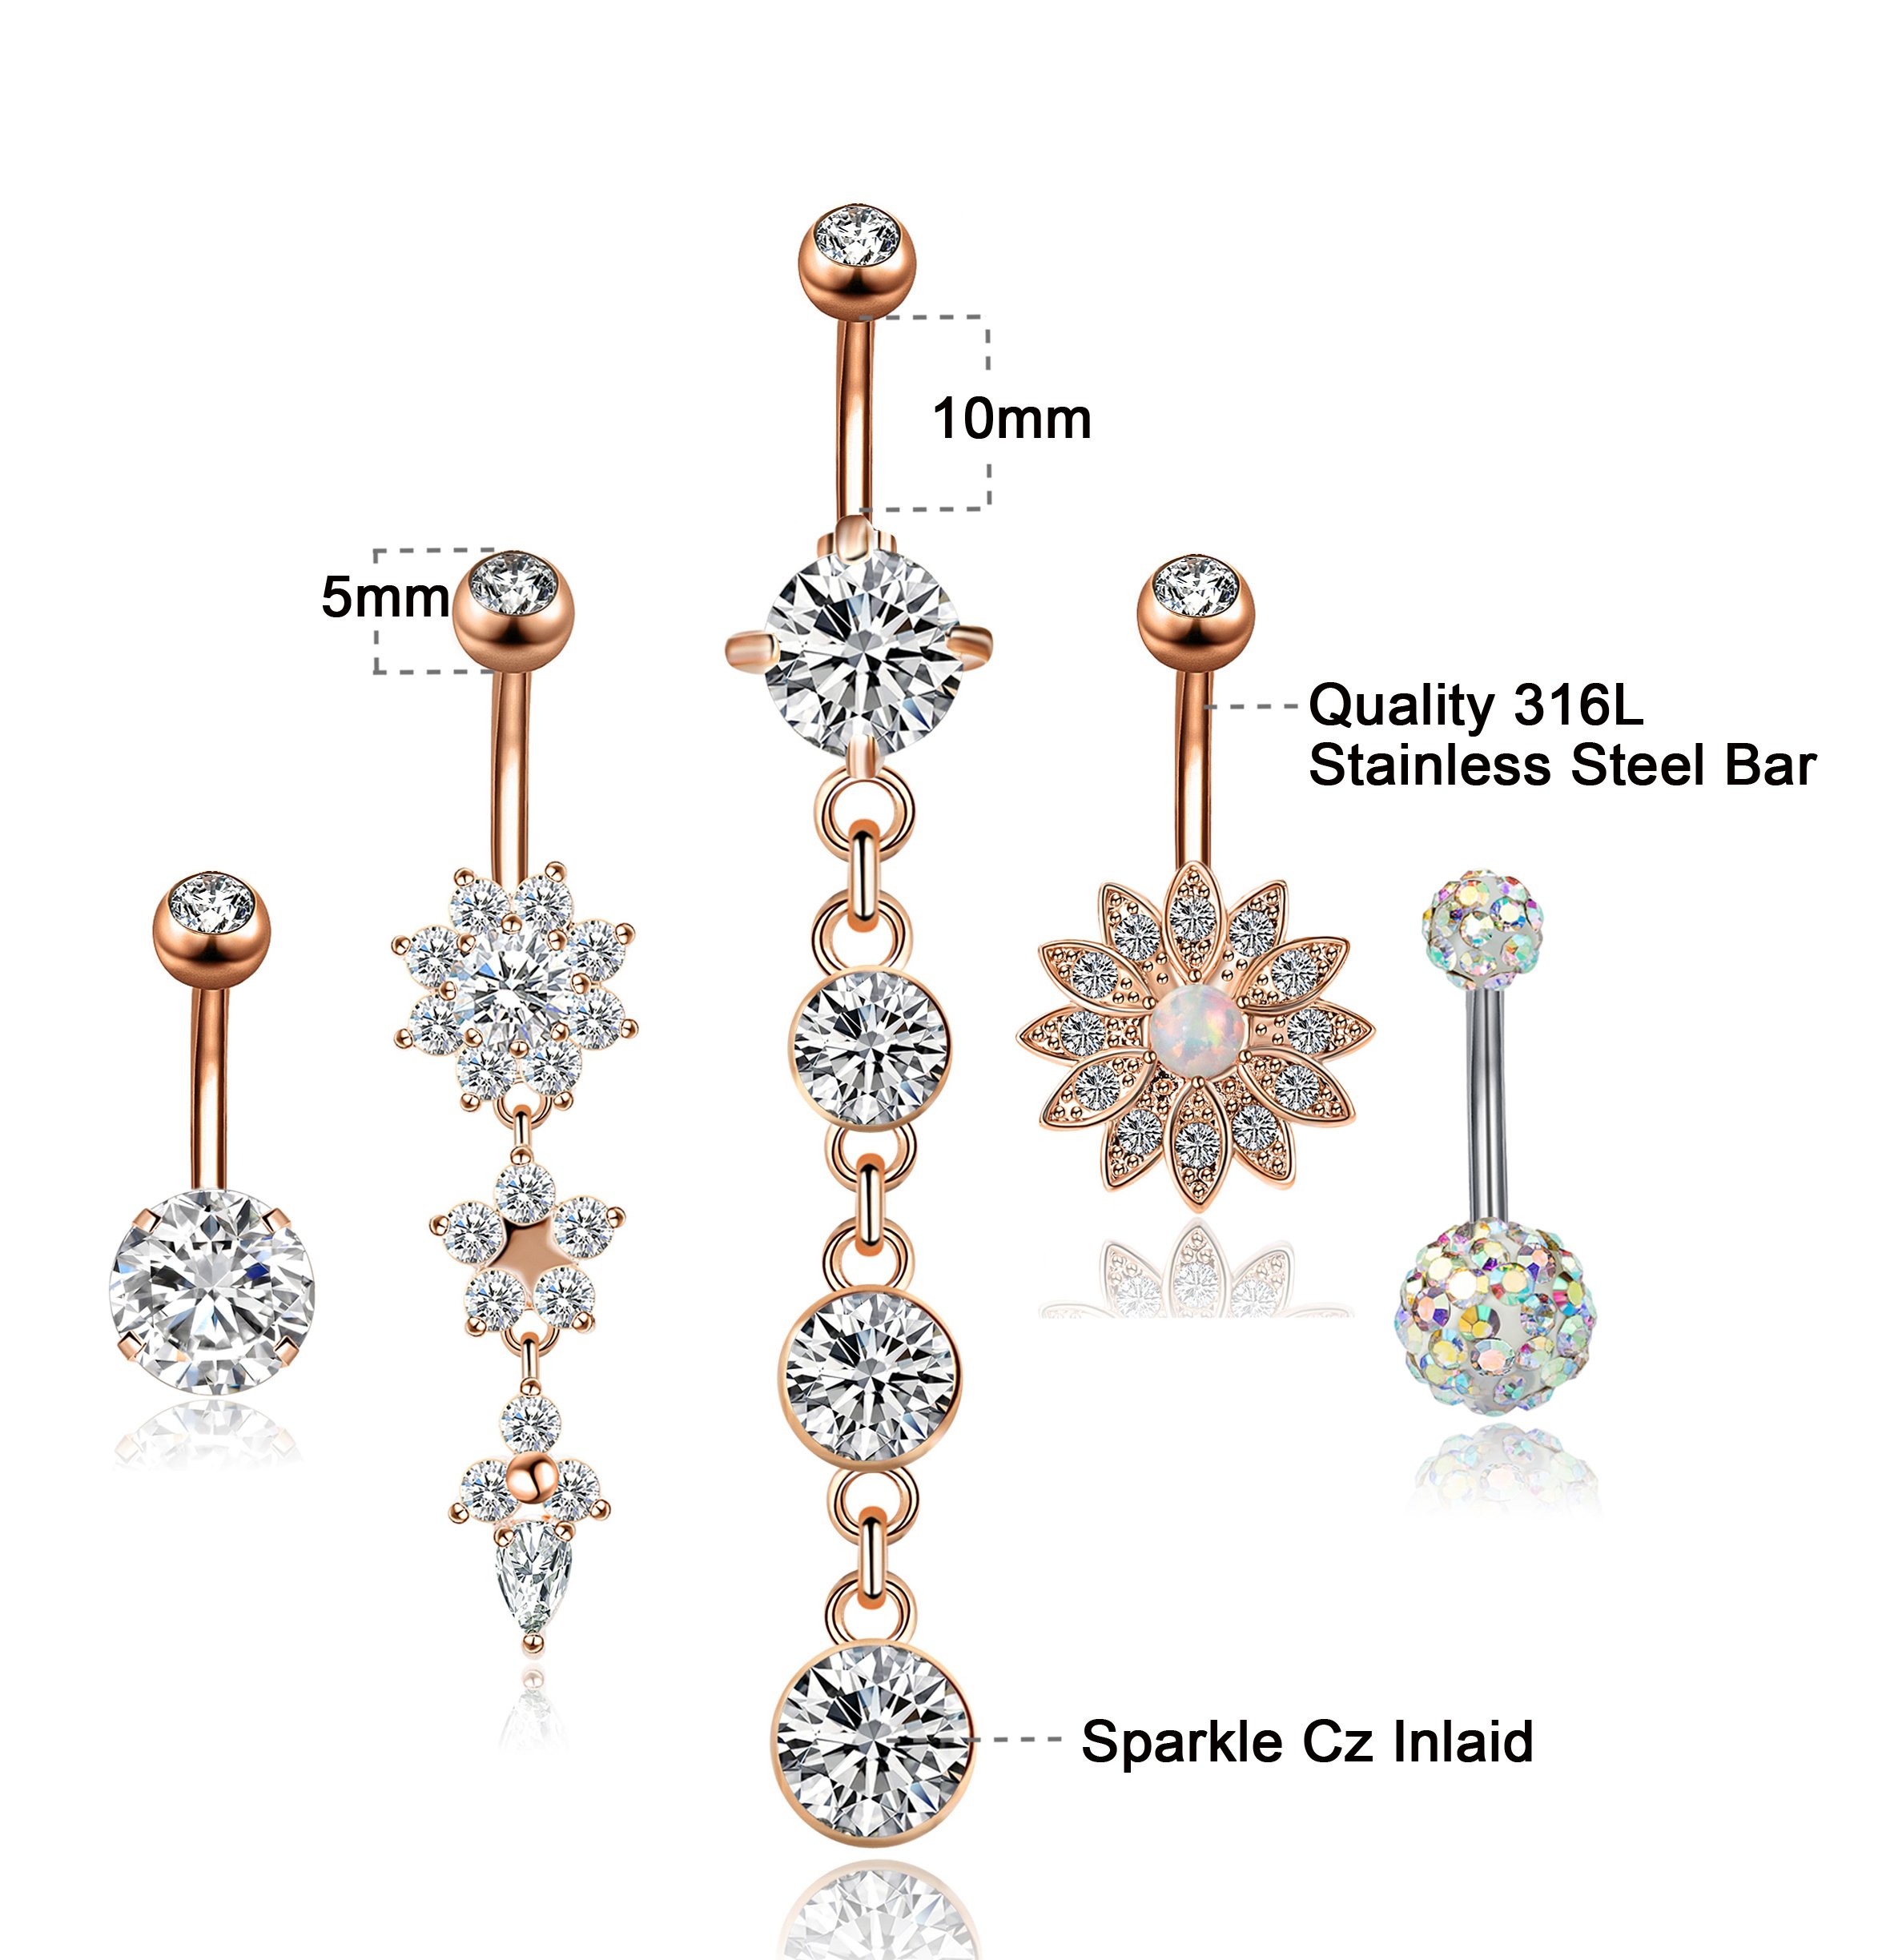 YOVORO 5-10PCS 14G 316L Stainless Steel Dangle Belly Button Rings for Women Navel Rings Curved Barbell Body Piercing